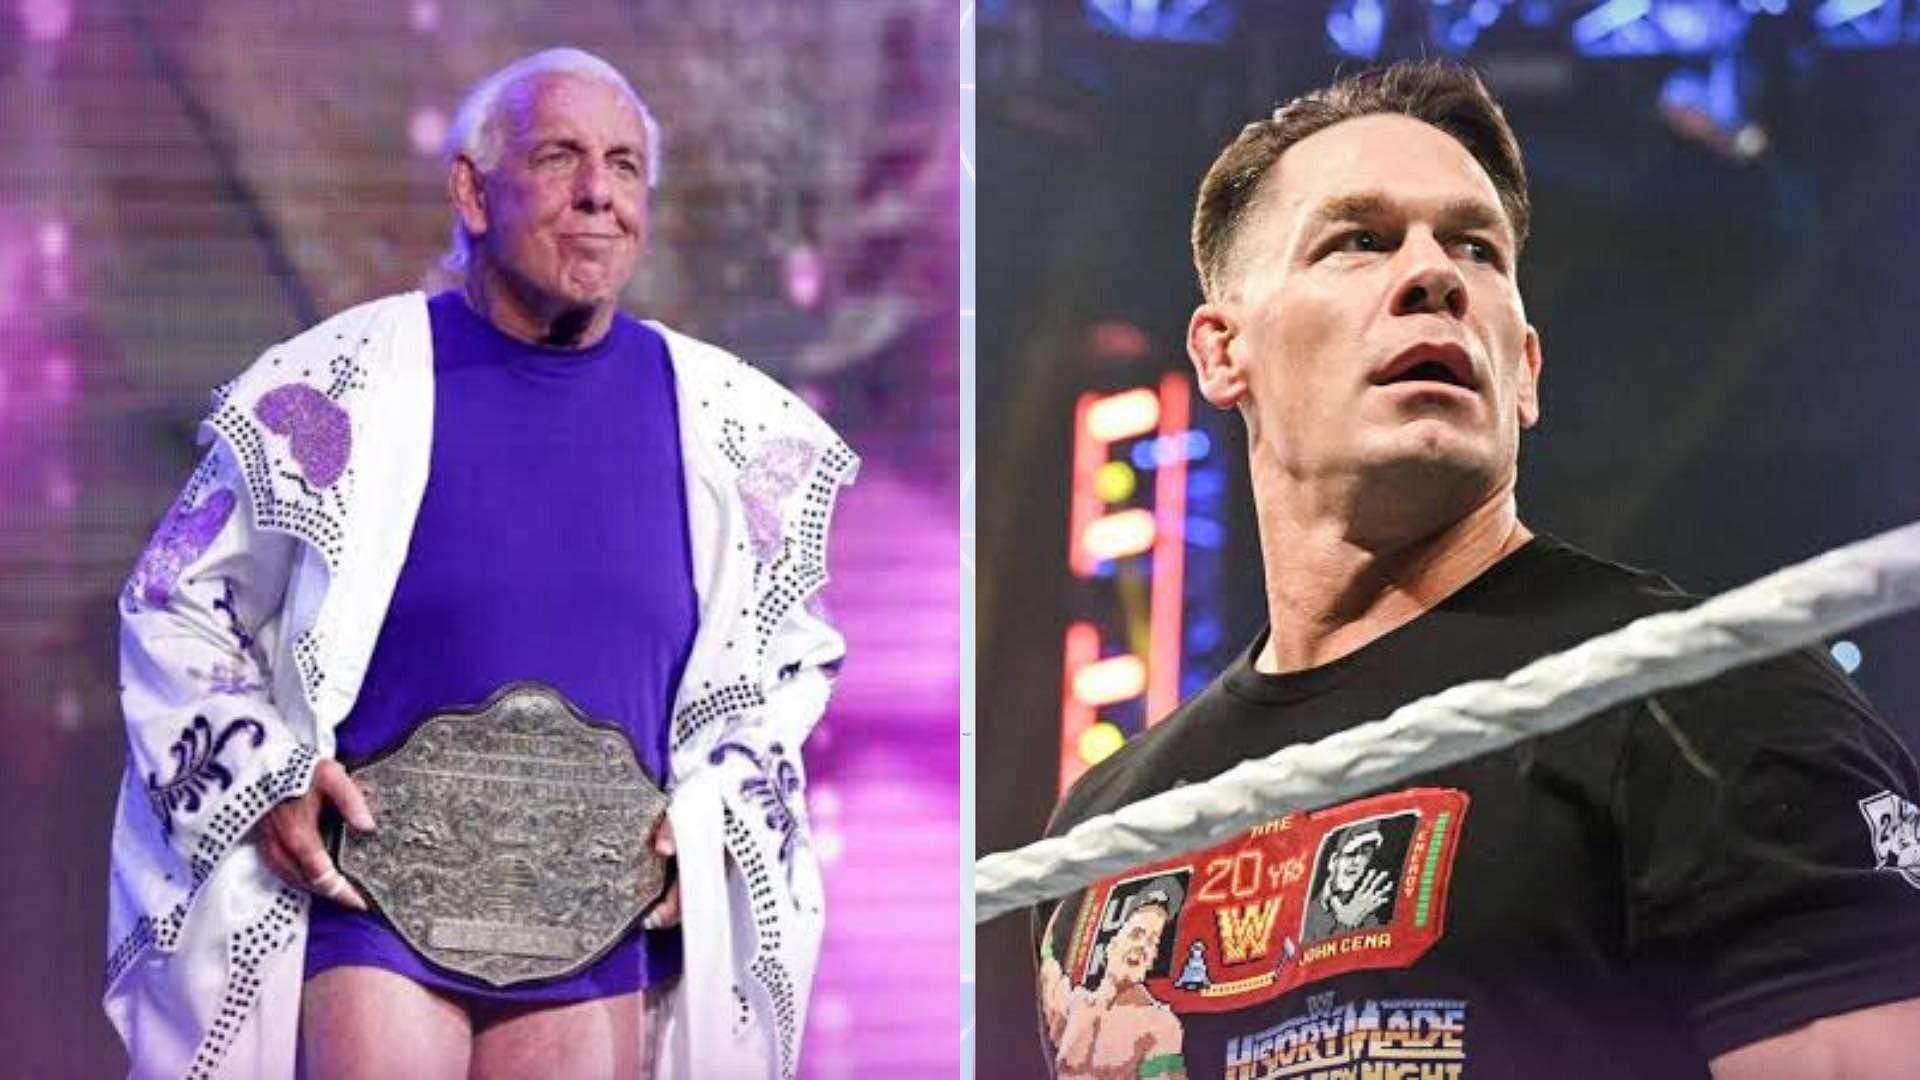 Ric Flair and Cena have both held 16 world titles